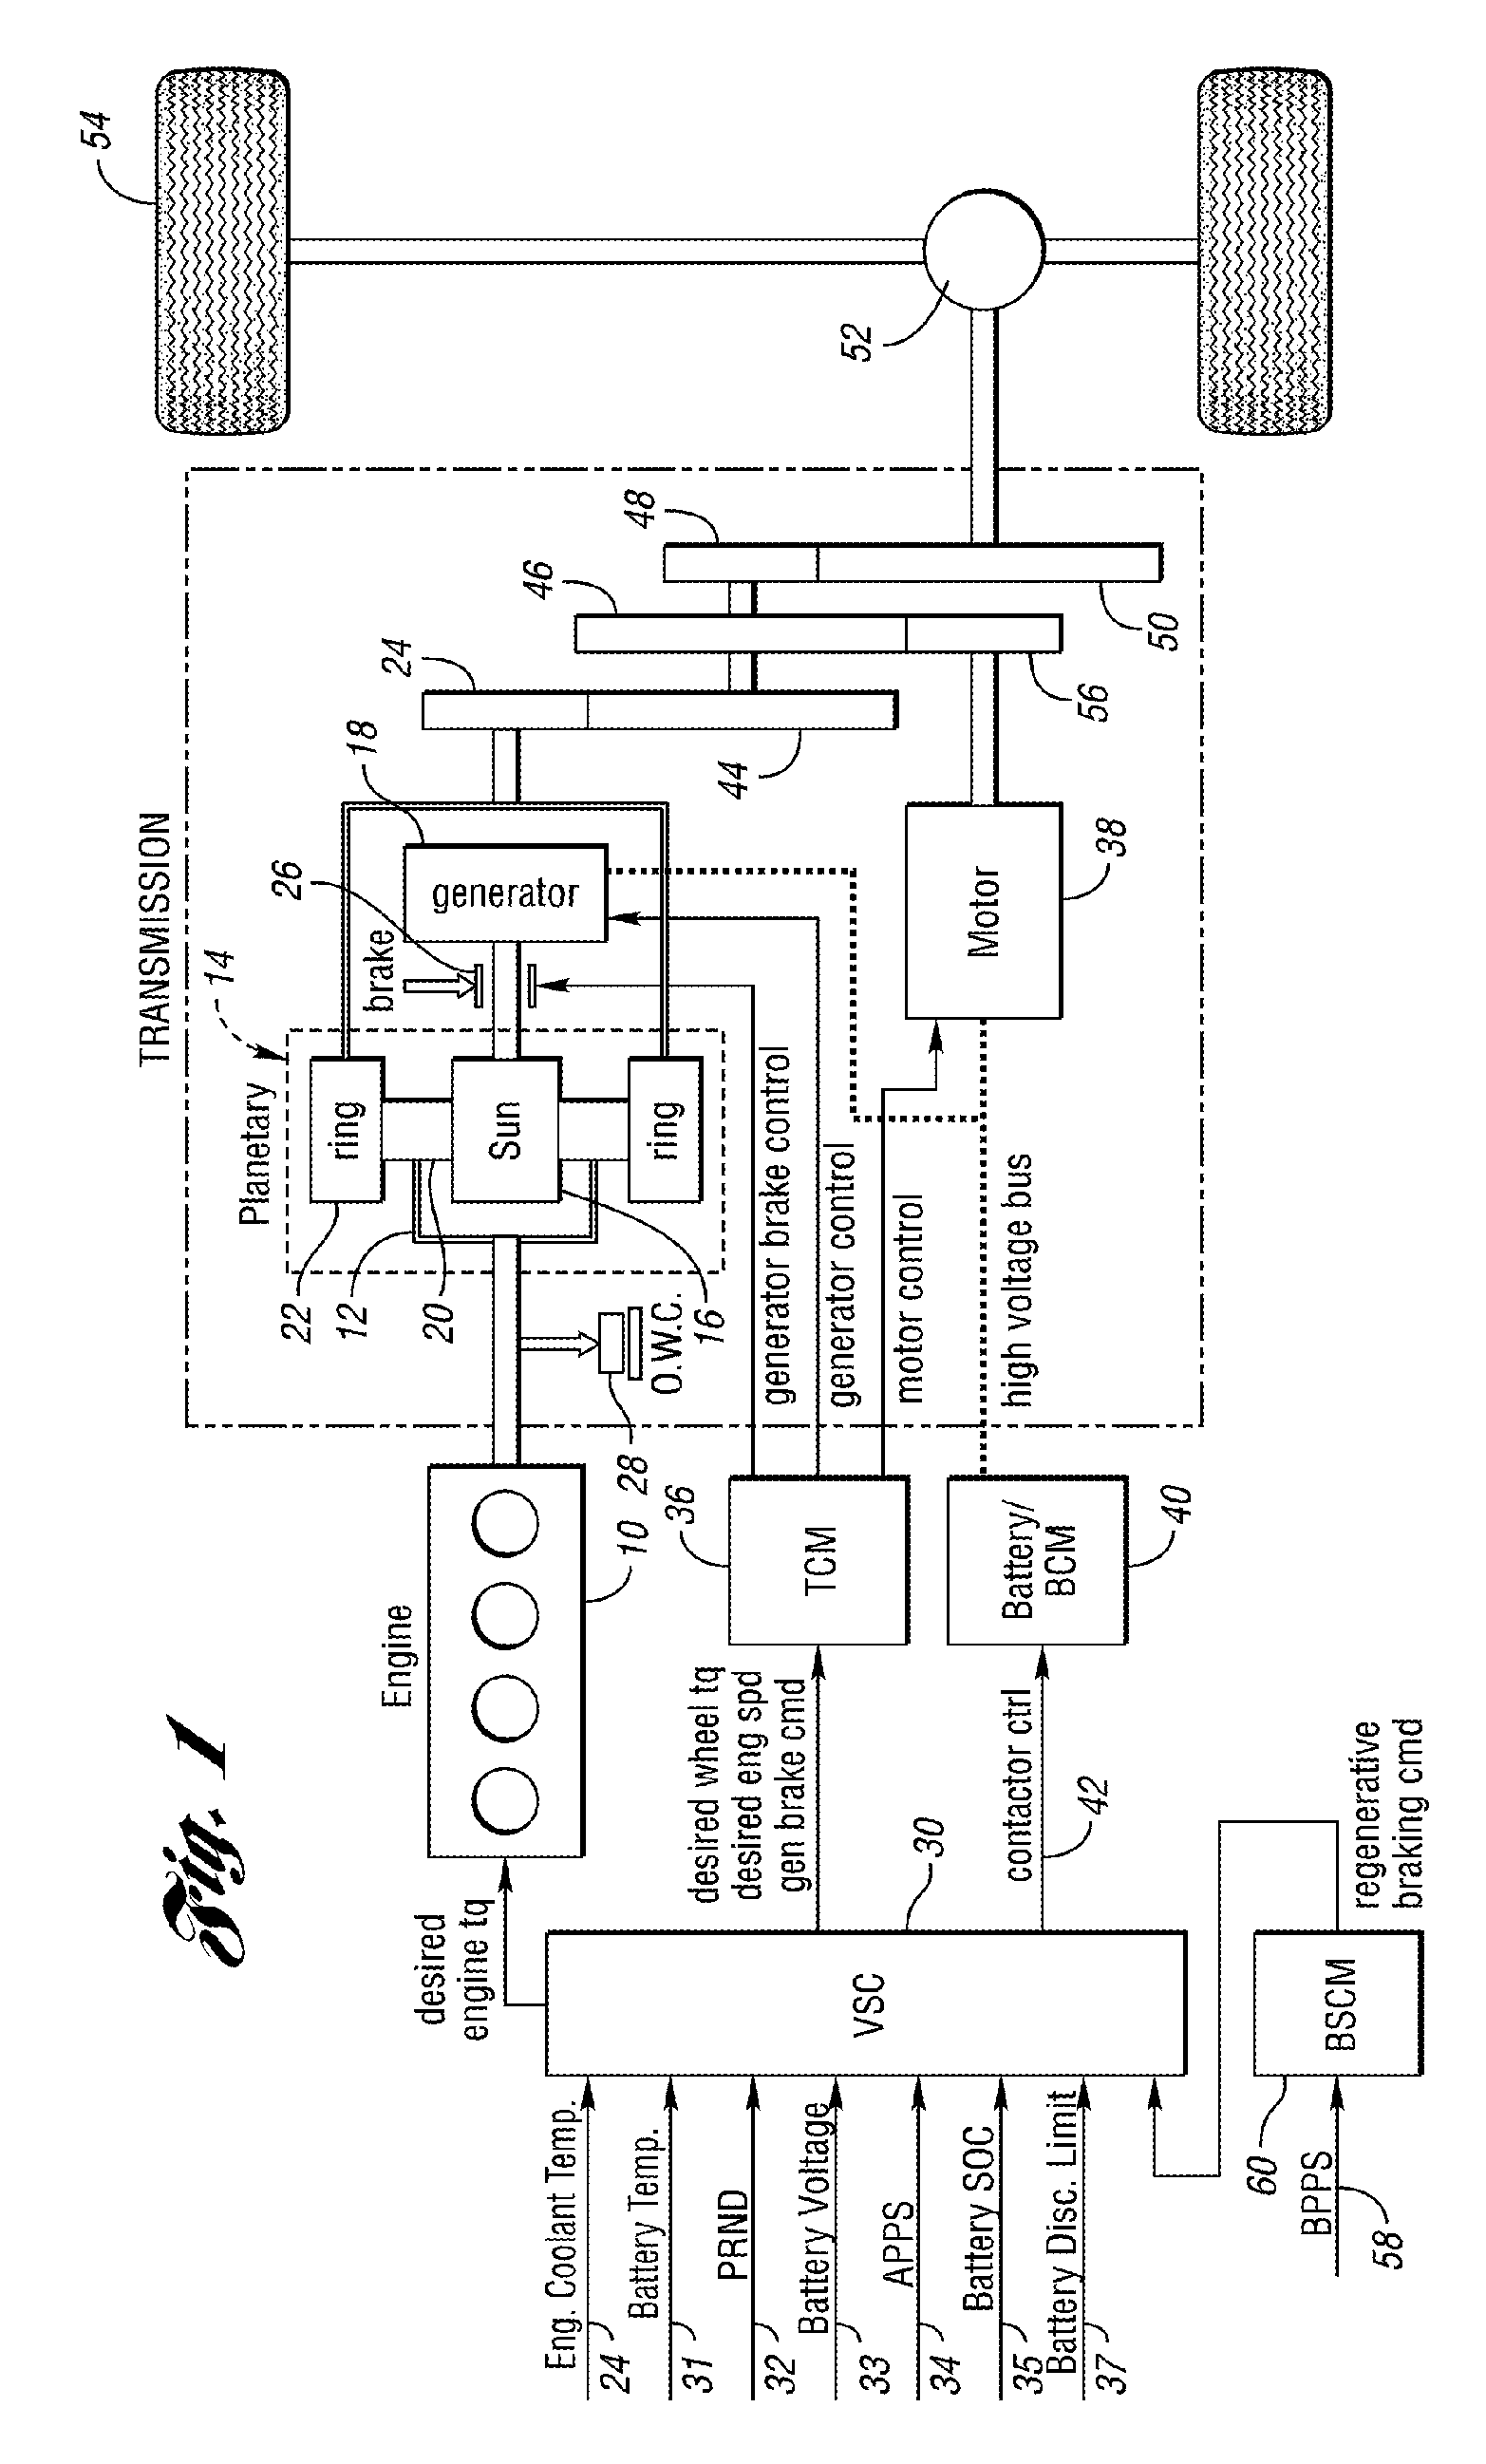 Method for controlling engine starts for a vehicle powertrain